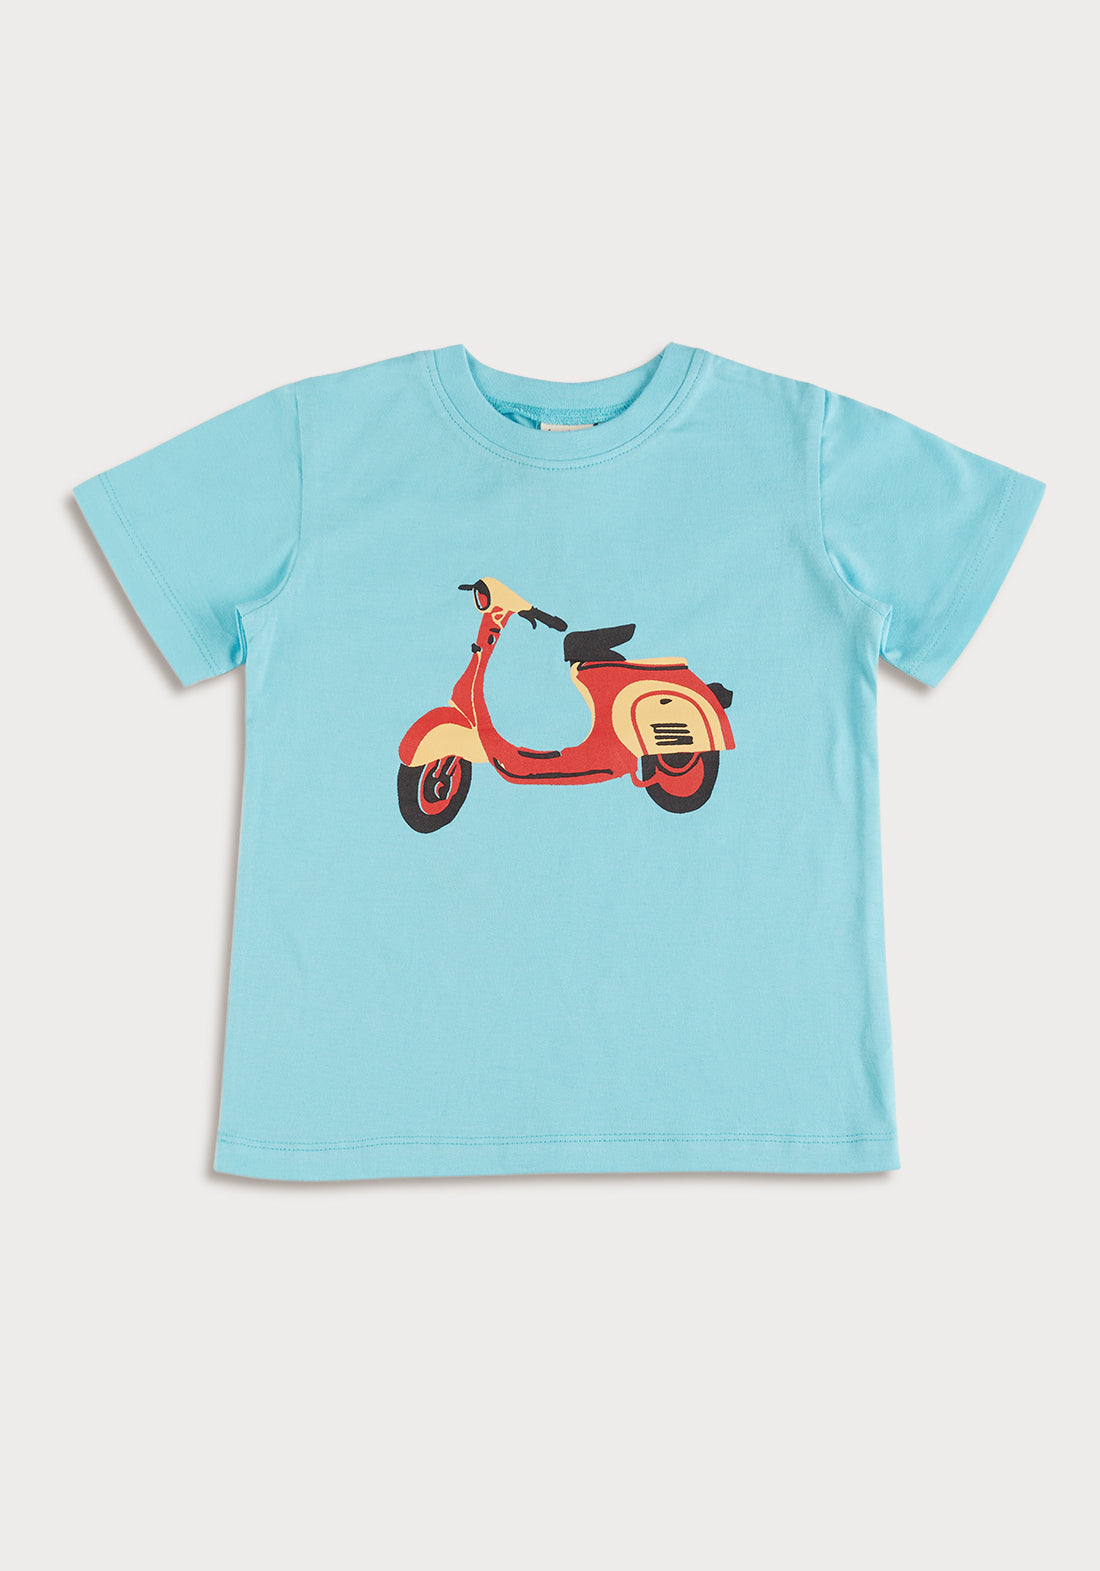 RED, YELLOW AND BLACK SCOOTER PLACEMENT PRINT Short Sleeve Tee